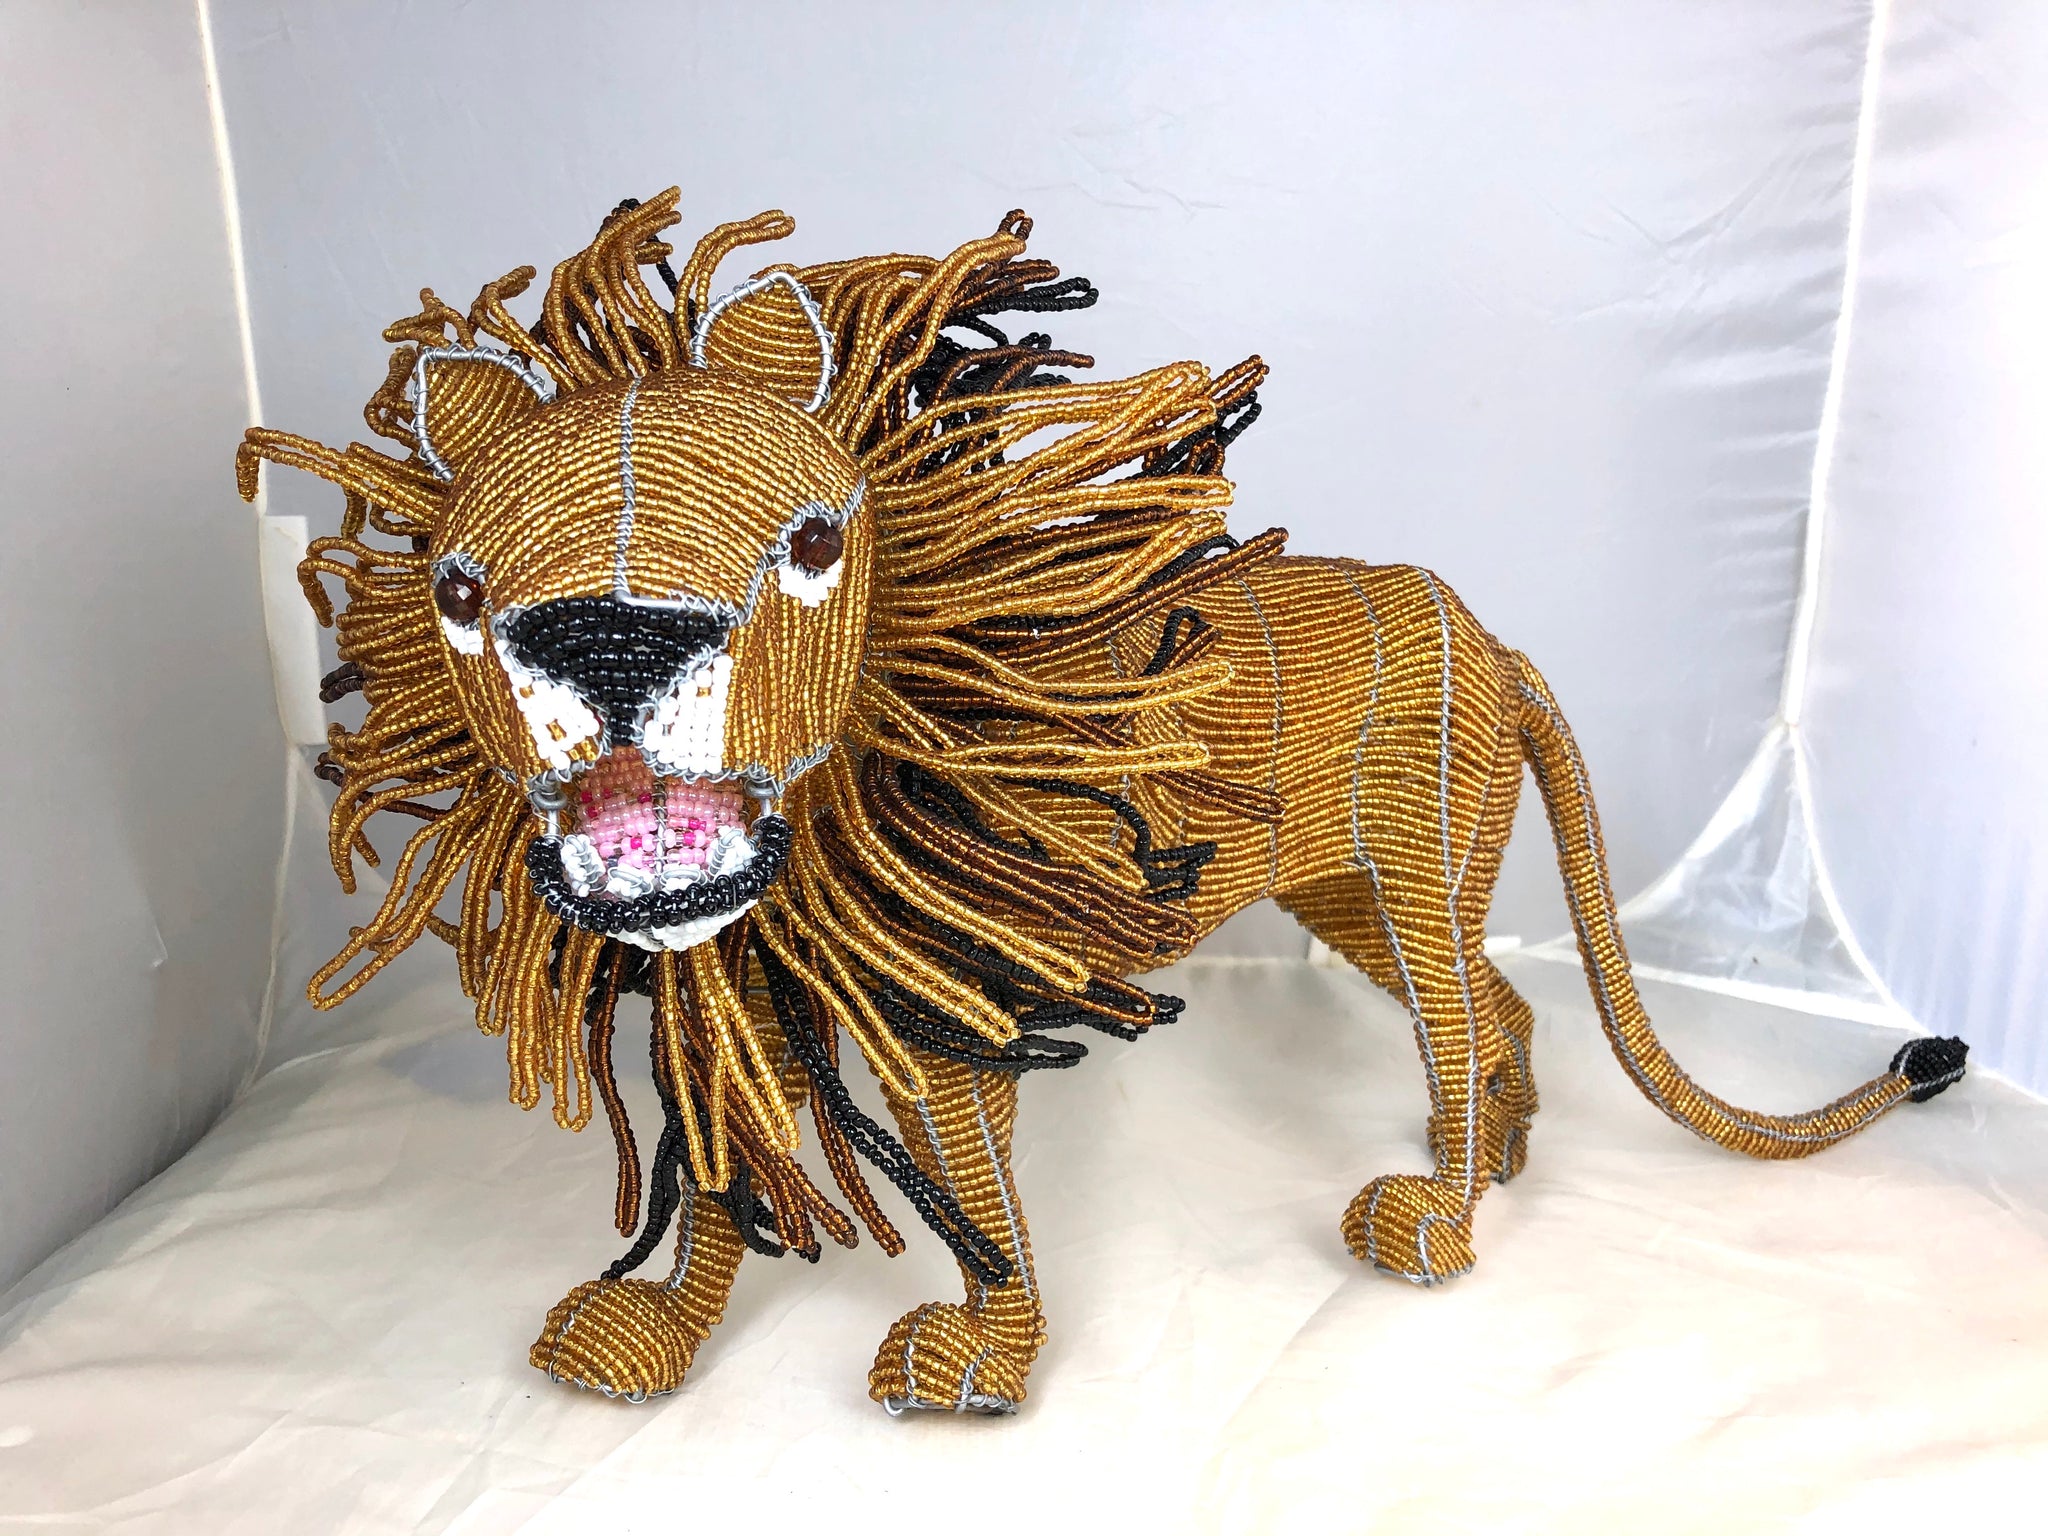 Large Lion Figurine. Wire and beaded glass. Hand crafted beaded art. Fair Trade South Africa